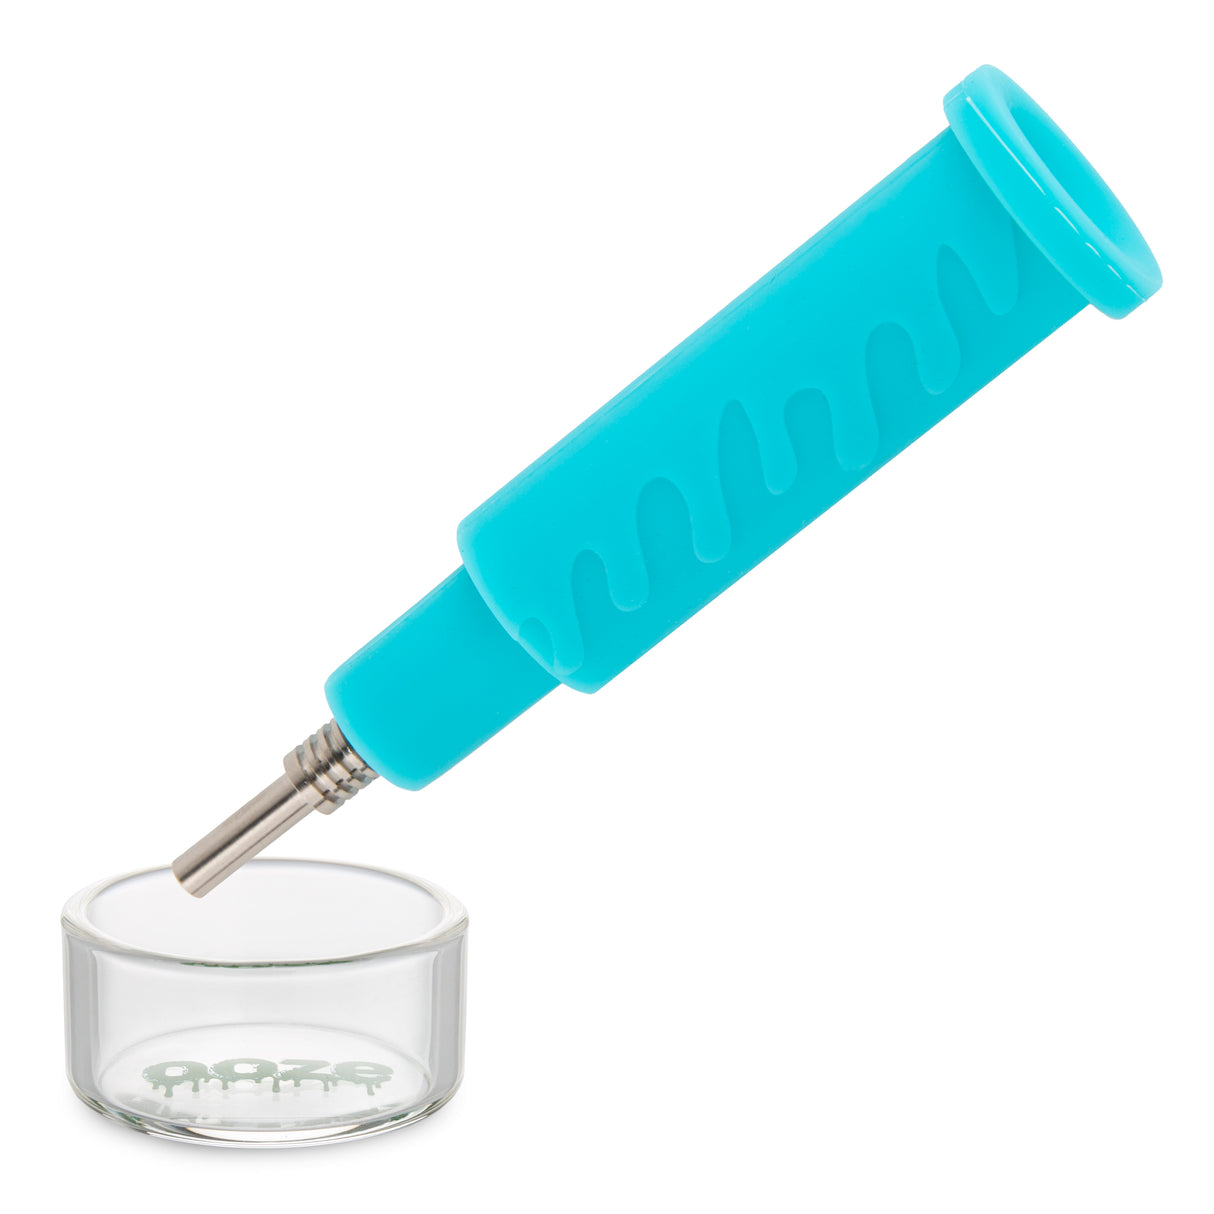 Ooze Swerve Silicone Water Pipe, Dab Rig & Dab Straw - Aqua Teal